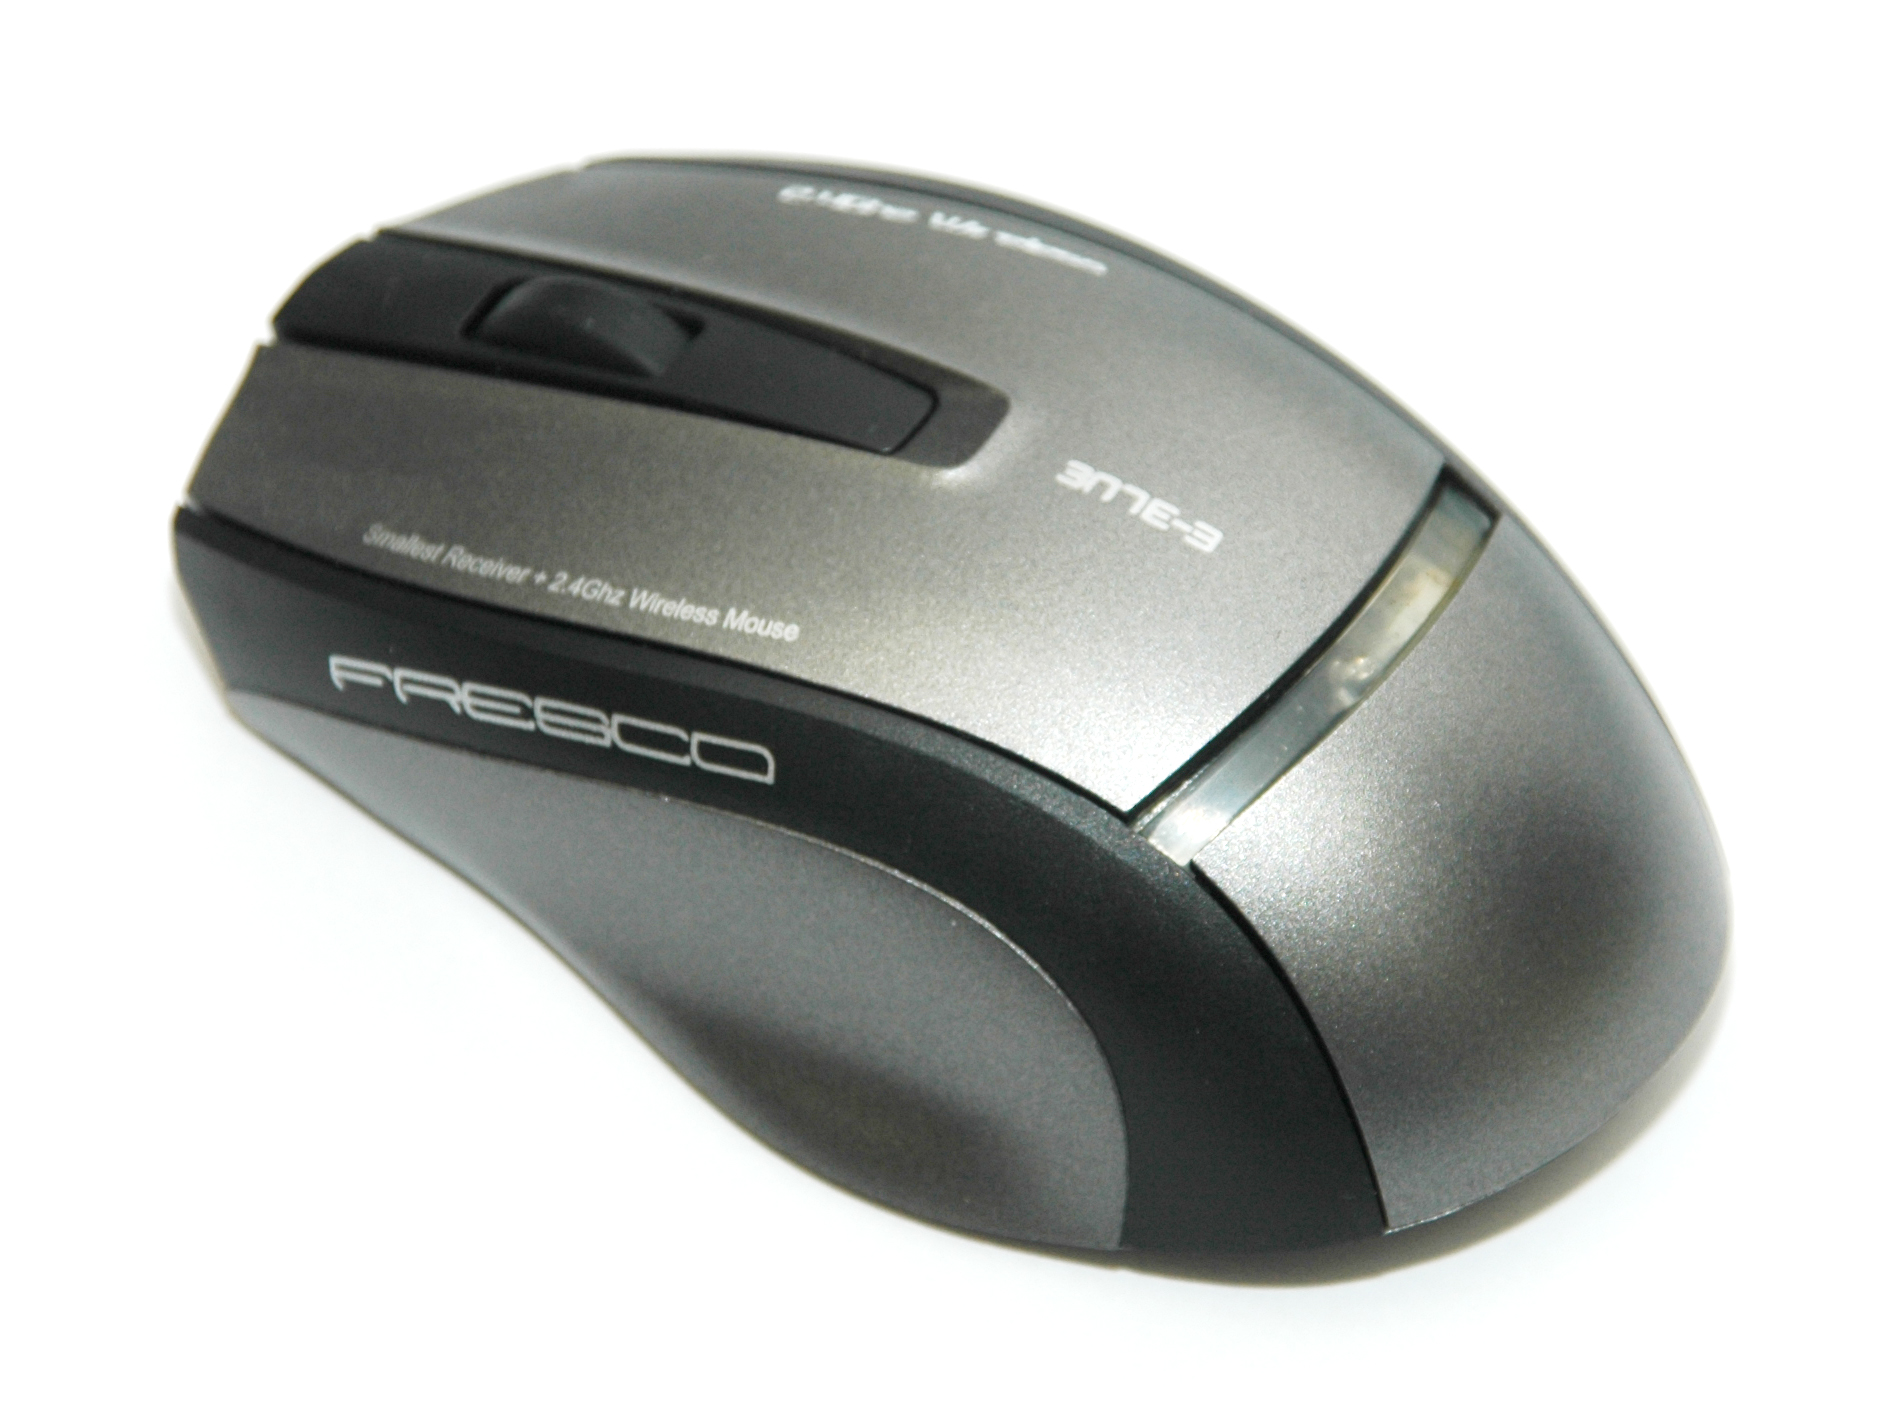 Wireless optical mouse